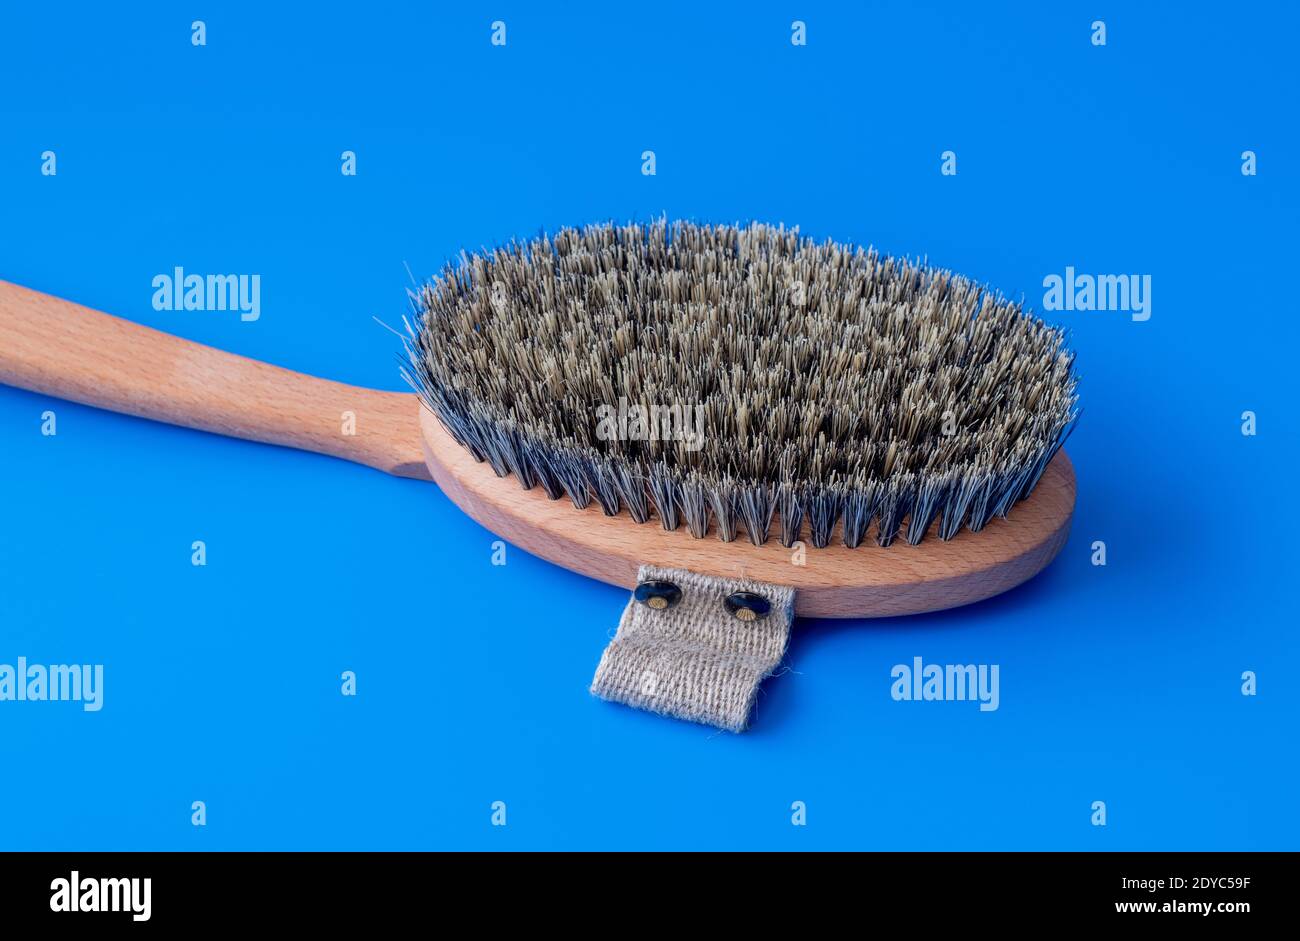 Massage brush with the natural boar bristles on a blue background Stock Photo